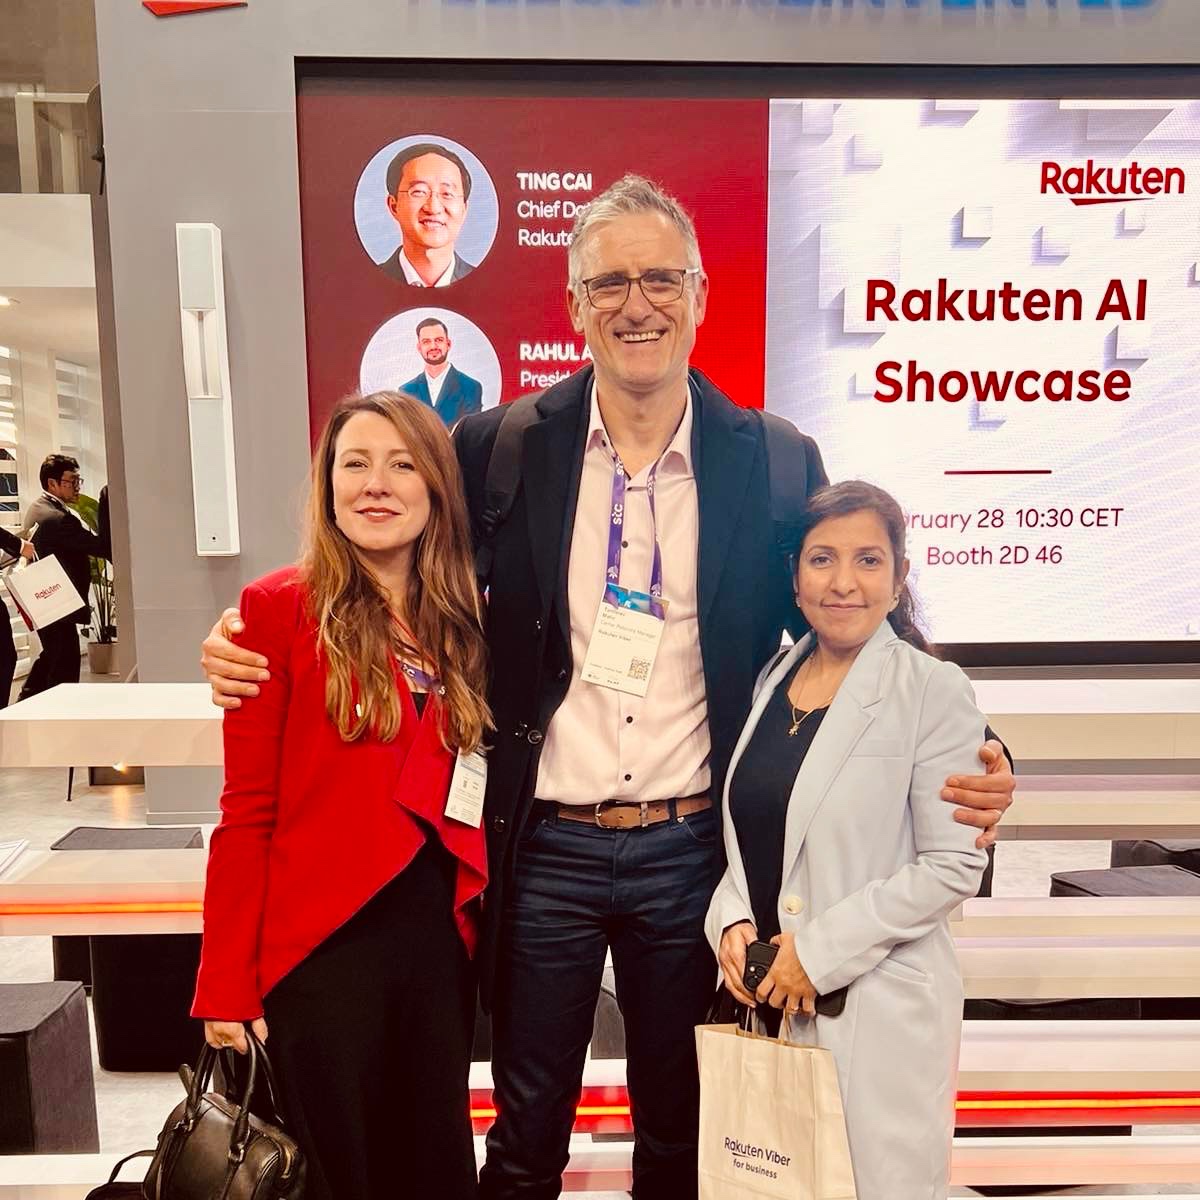 🌐Having an exciting time at @MWCHub Barcelona with bustling networking and activities at @MEF's The Future of Mobile! Drop by the Rakuten booth in 𝗛𝗮𝗹𝗹 𝟮, 𝟮𝗗𝟰𝟲 to discuss how we can innovate together. 💪 #MWC #MWC24 #MWCBarcelona